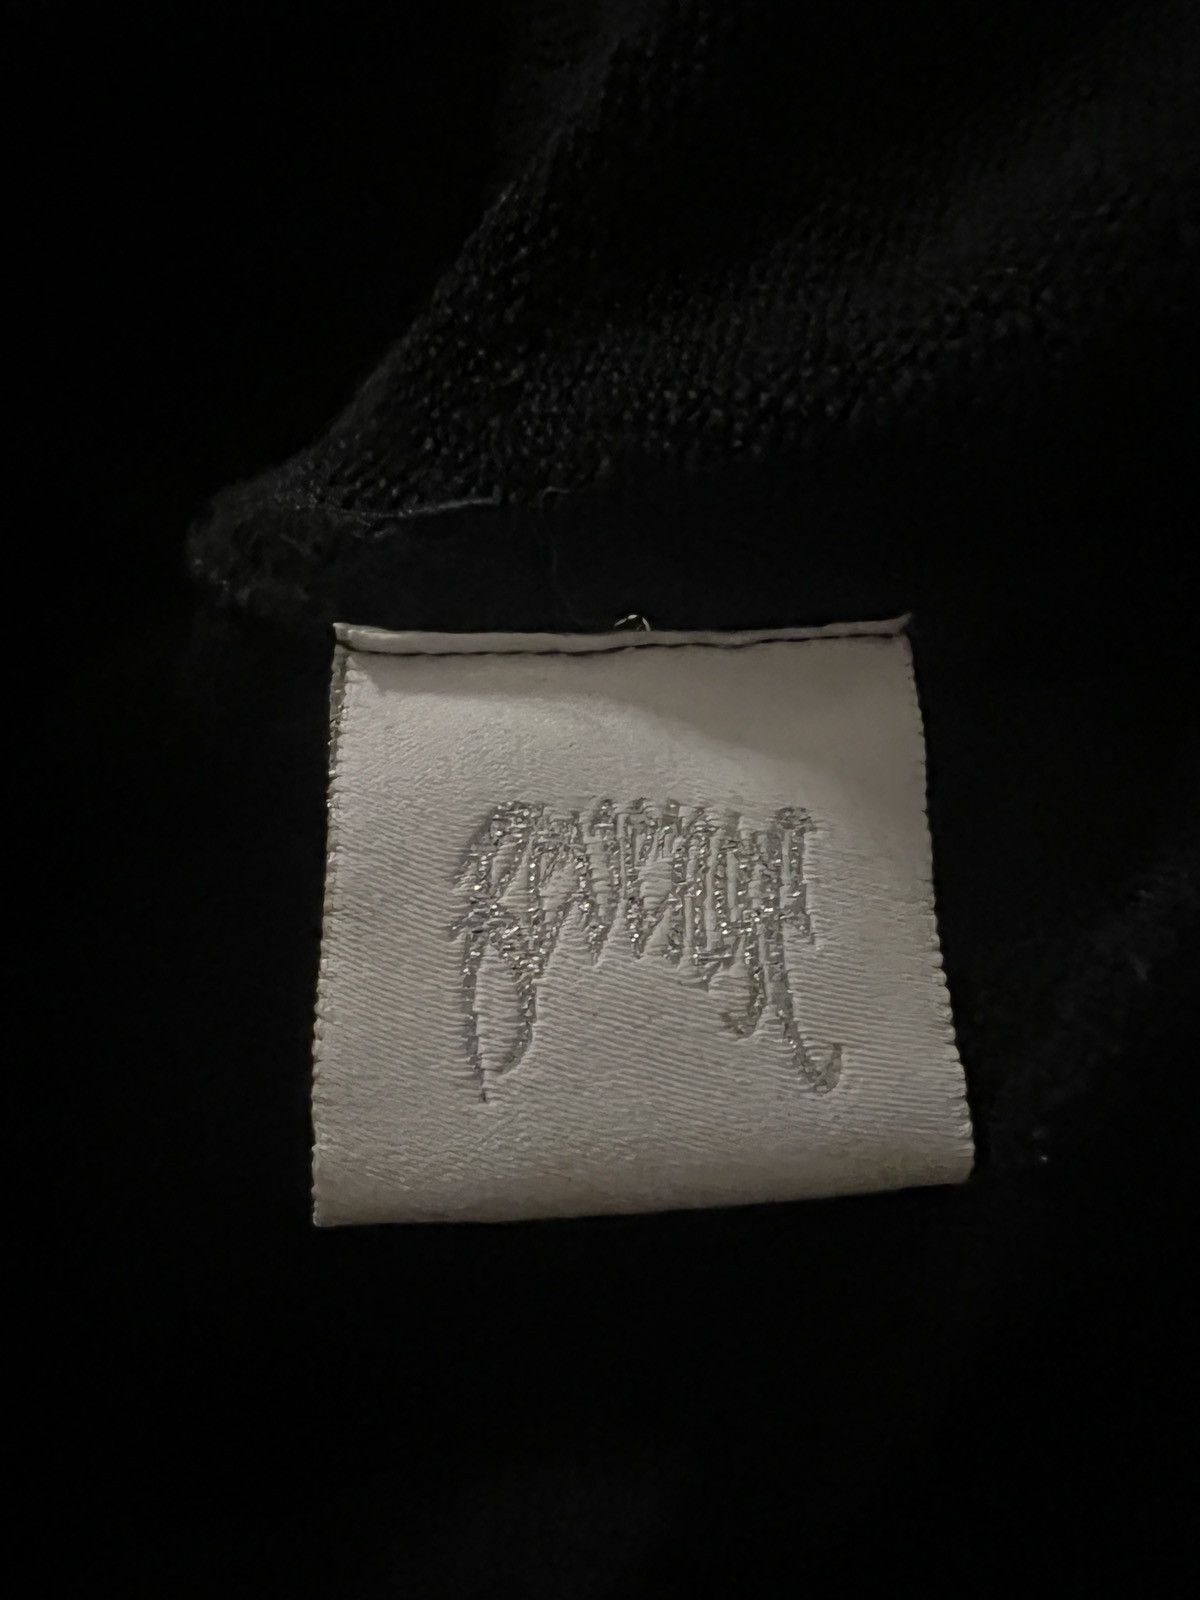 Revenge Revenge Zip up hoodie Embroidery on hood Size US L / EU 52-54 / 3 - 6 Preview